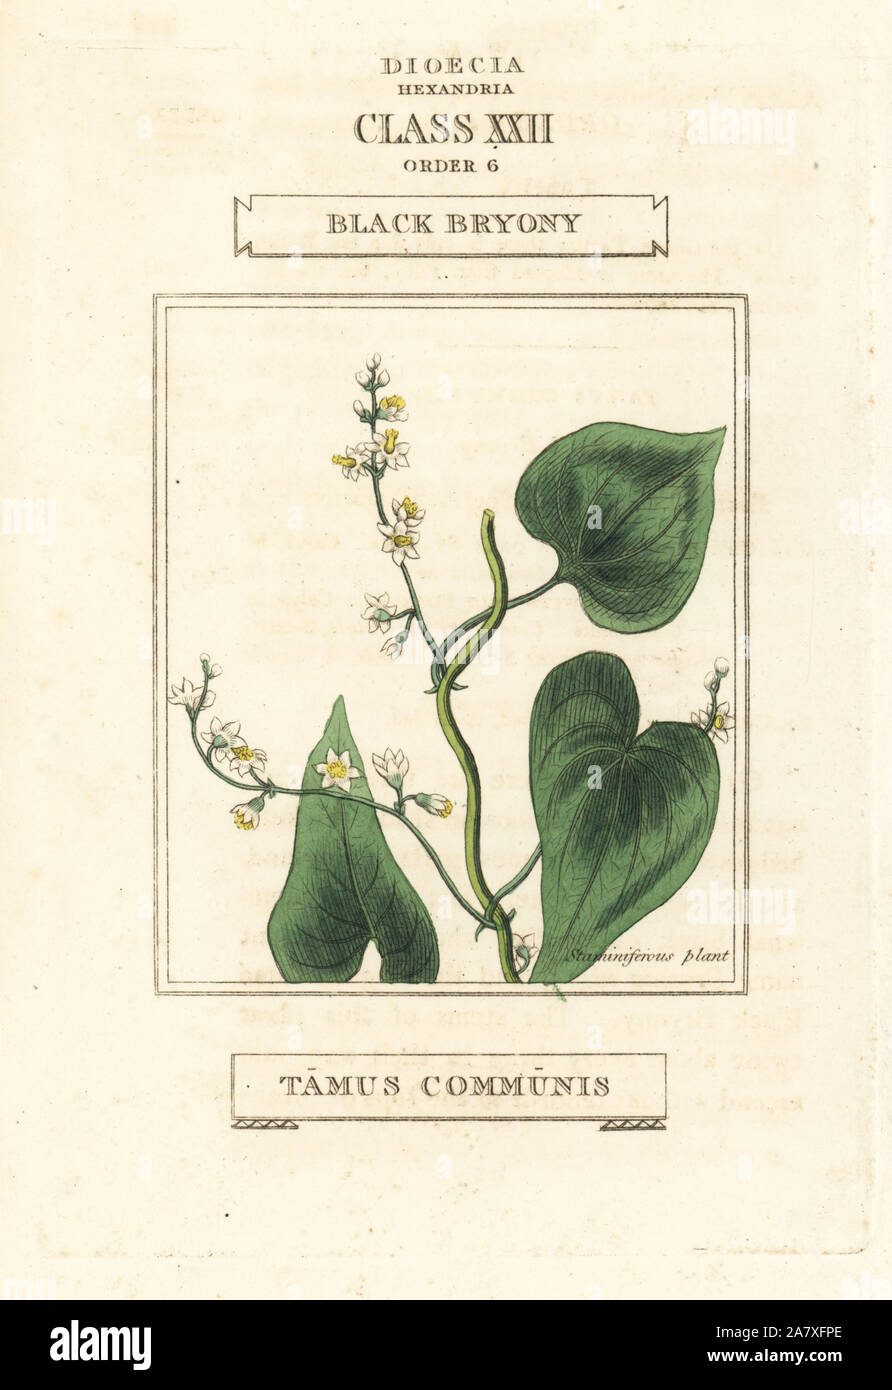 Black bryony, Dioscorea communis (Tamus communis). Handcoloured copperplate engraving after an illustration by Richard Duppa from his The Classes and Orders of the Linnaean System of Botany, Longman, Hurst, London, 1816. Stock Photo